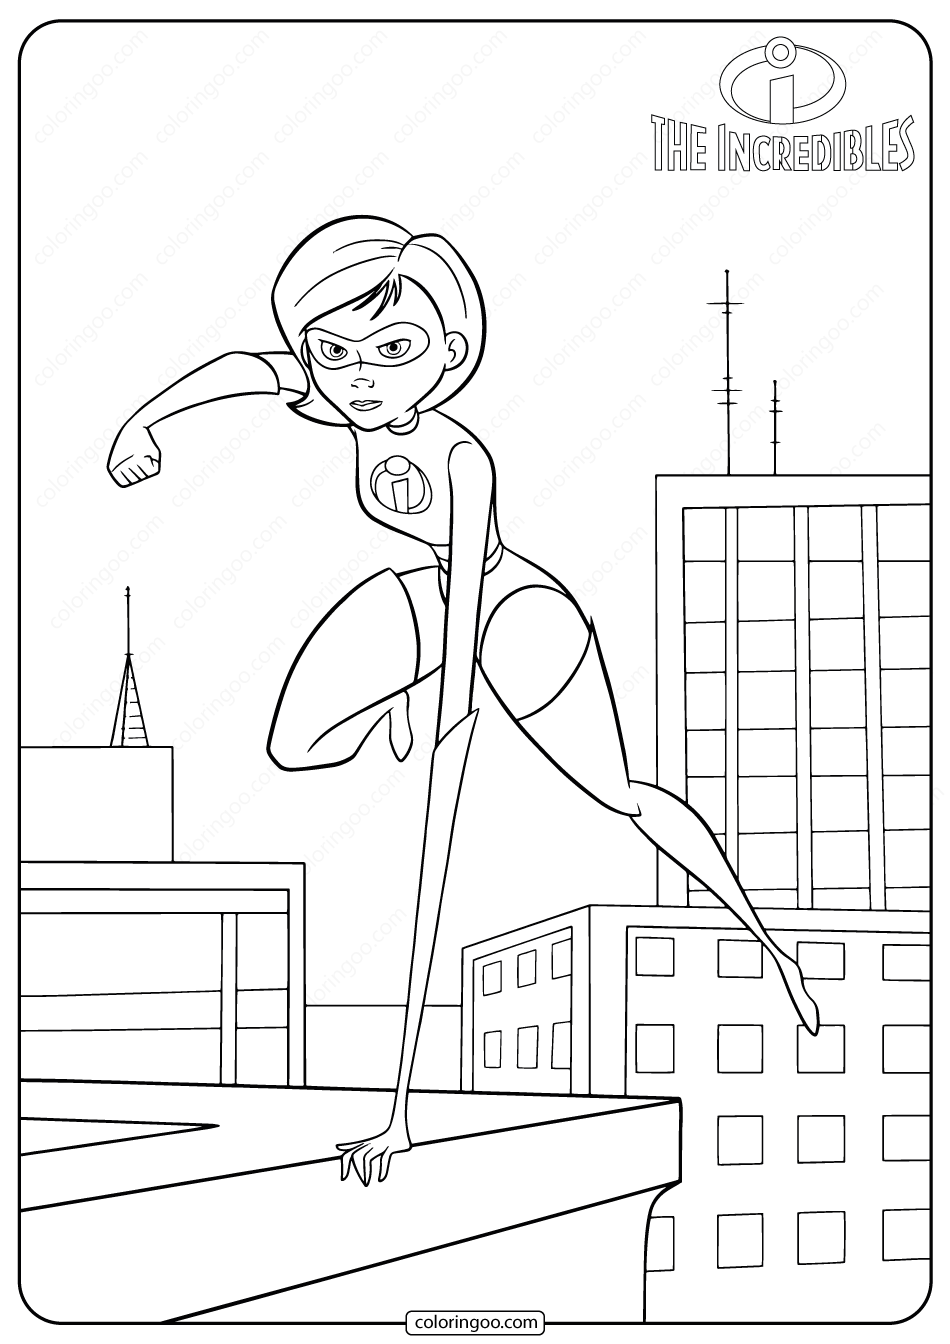 disney the incredibles mrs incredibles coloring pages